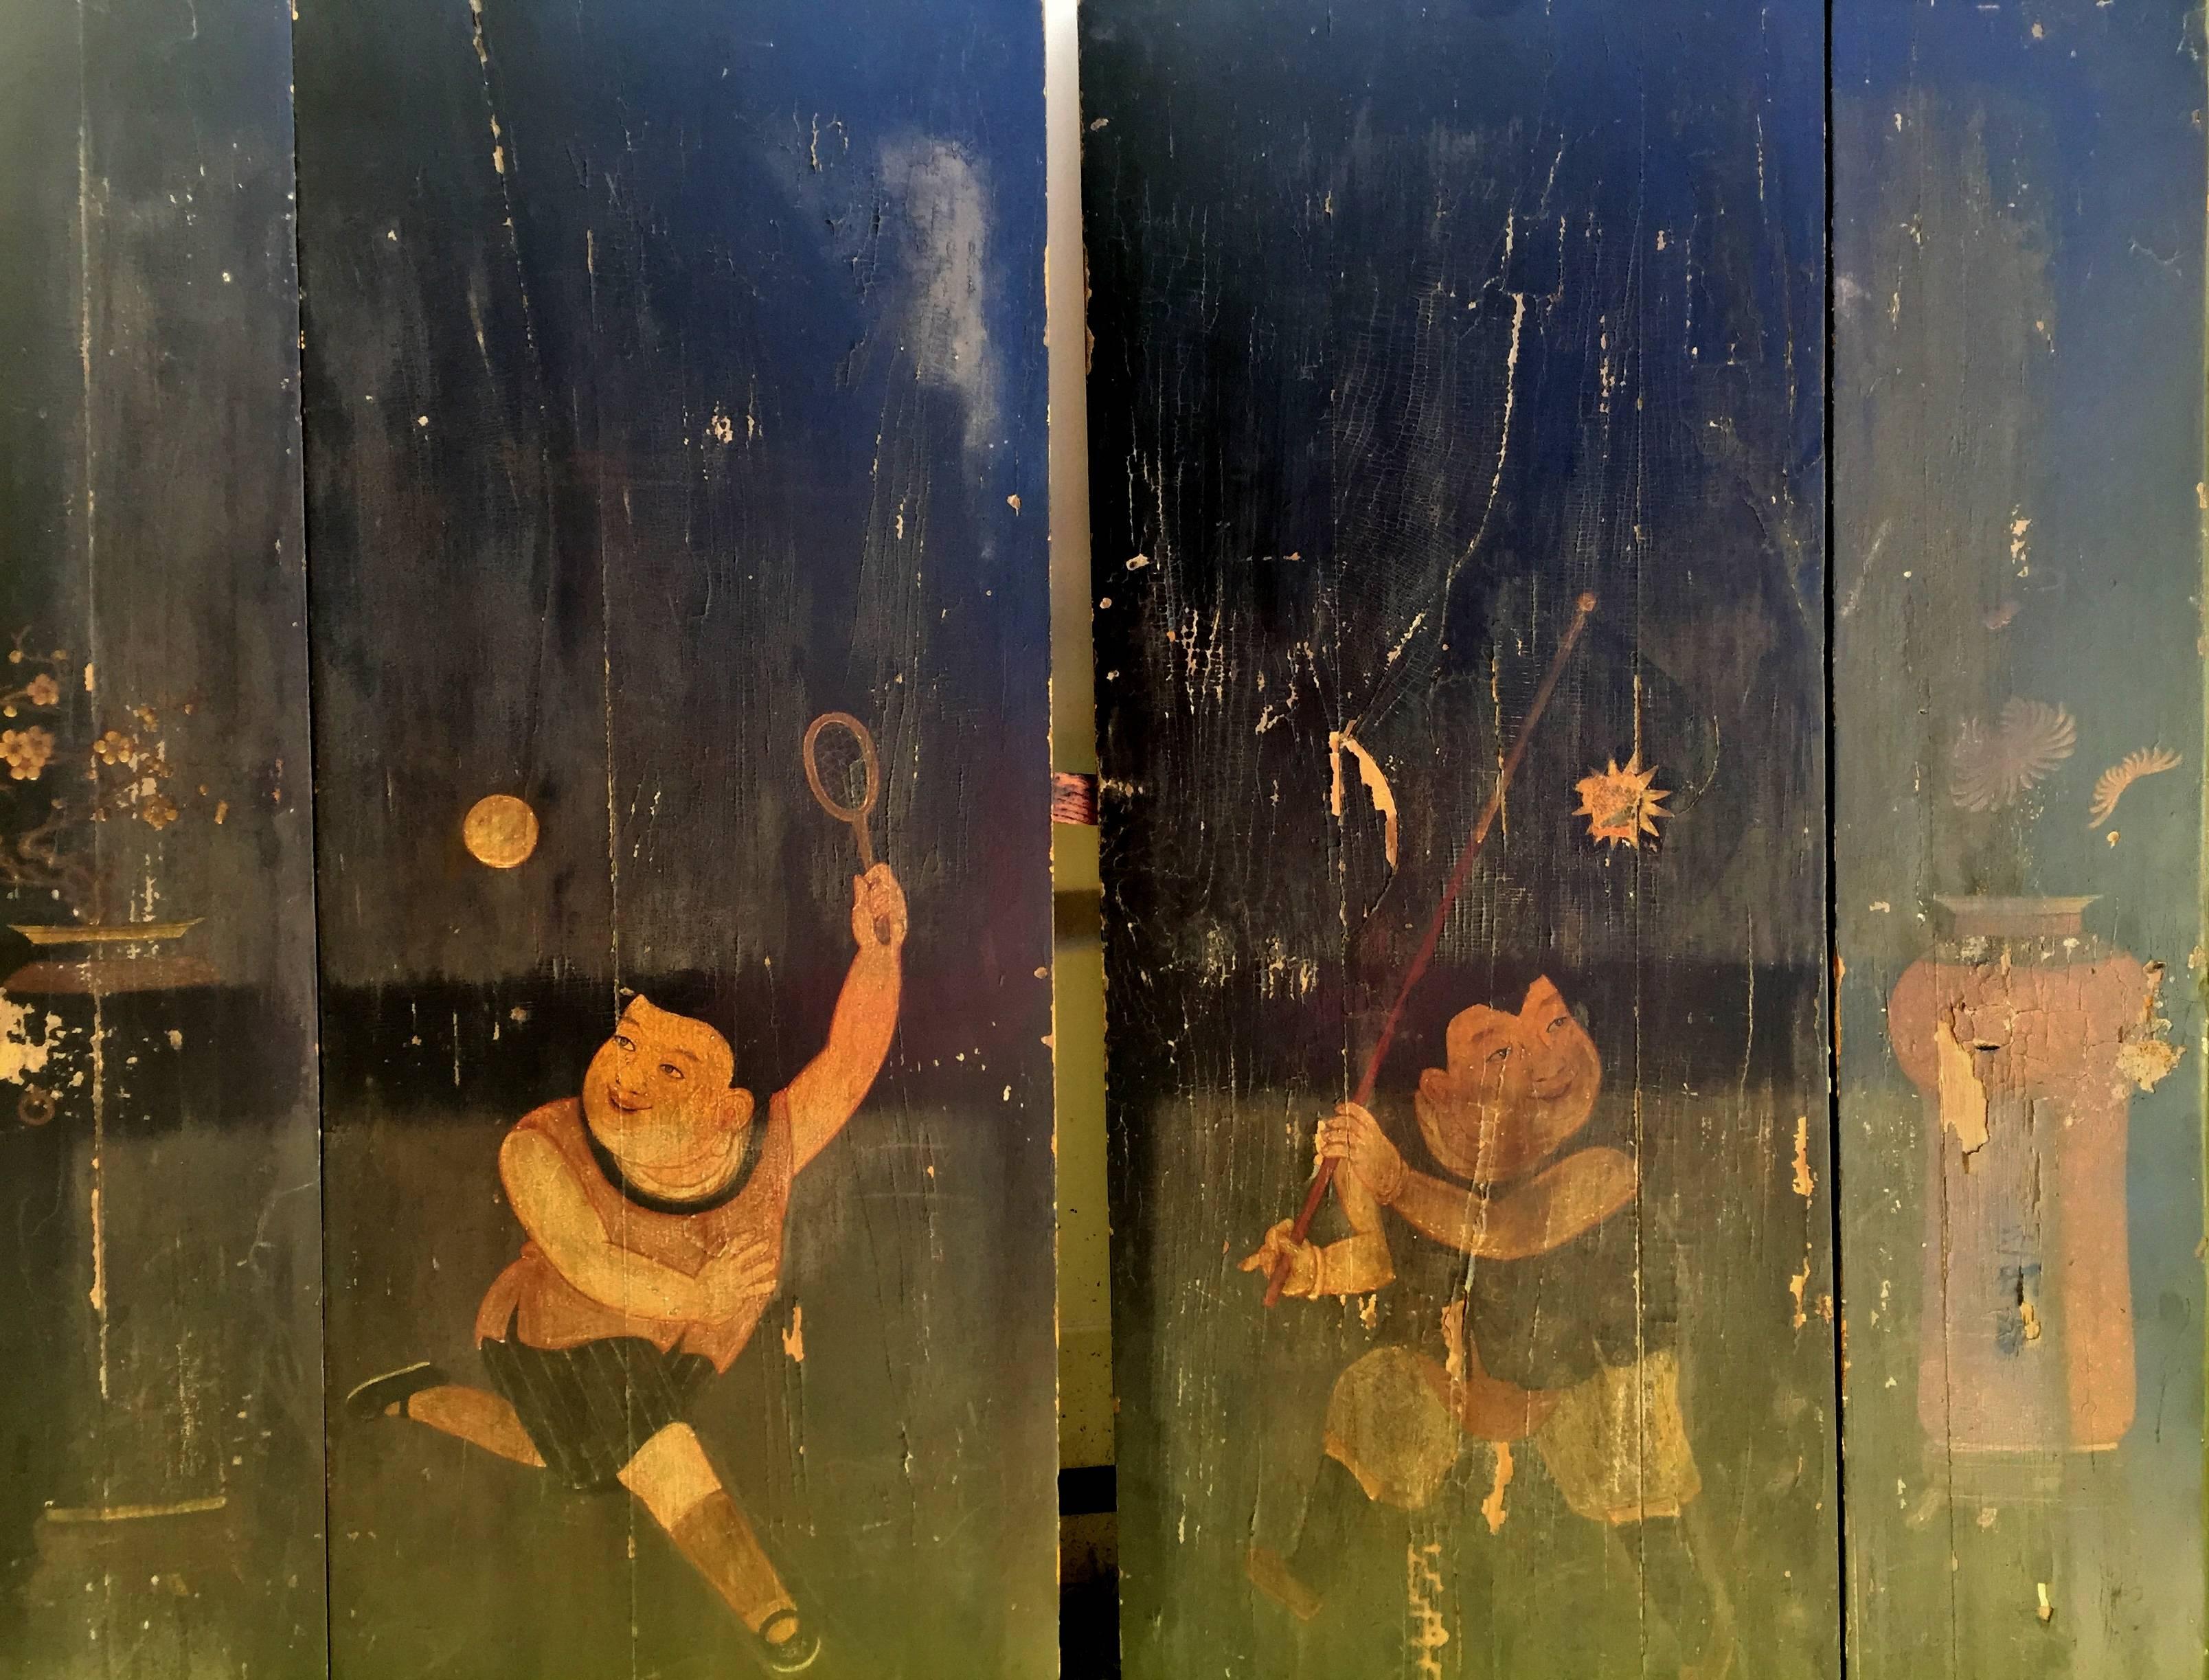 This wonderful pair of door is very special. Shorter and wider, they were made specially for the young sons of the family. Hand painted images of boys playing a ball game express great pride and happiness. The boy's outfits and the game they are